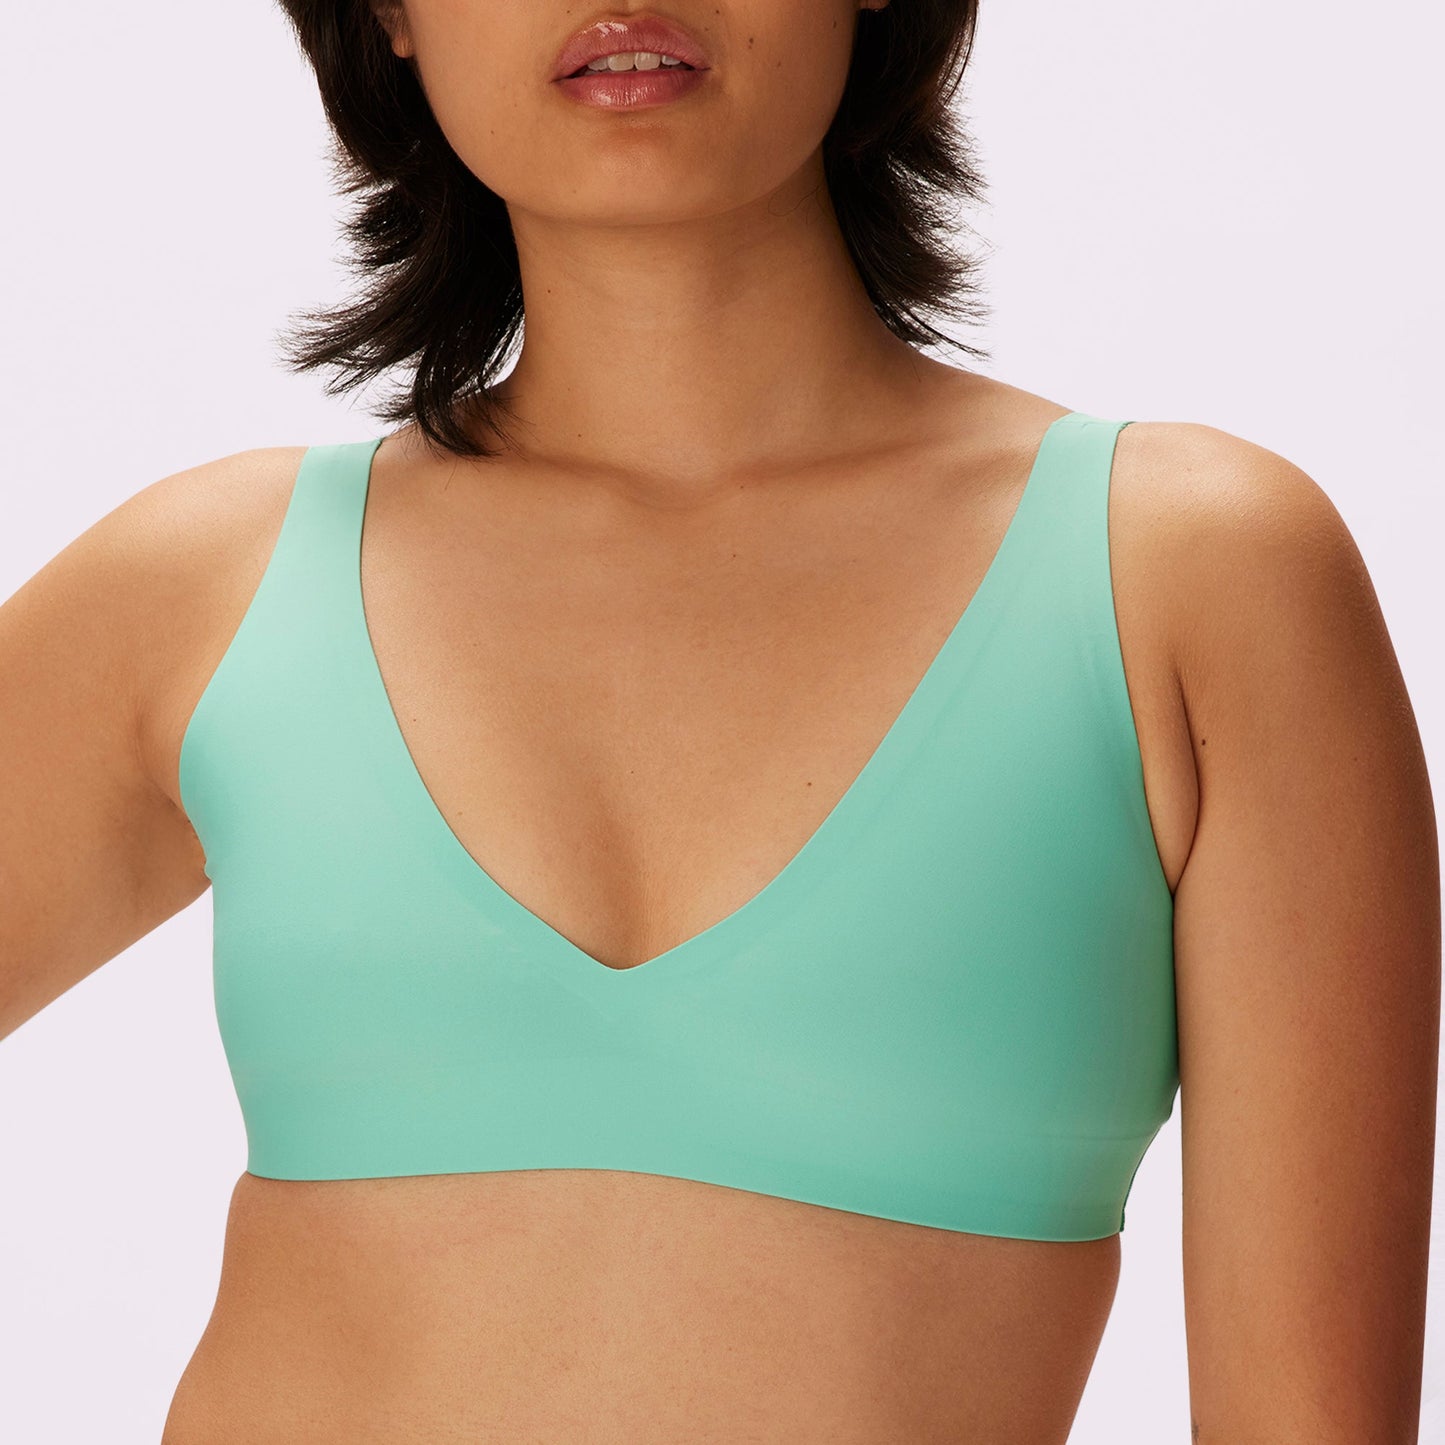 3 tips how to add support to a bralette